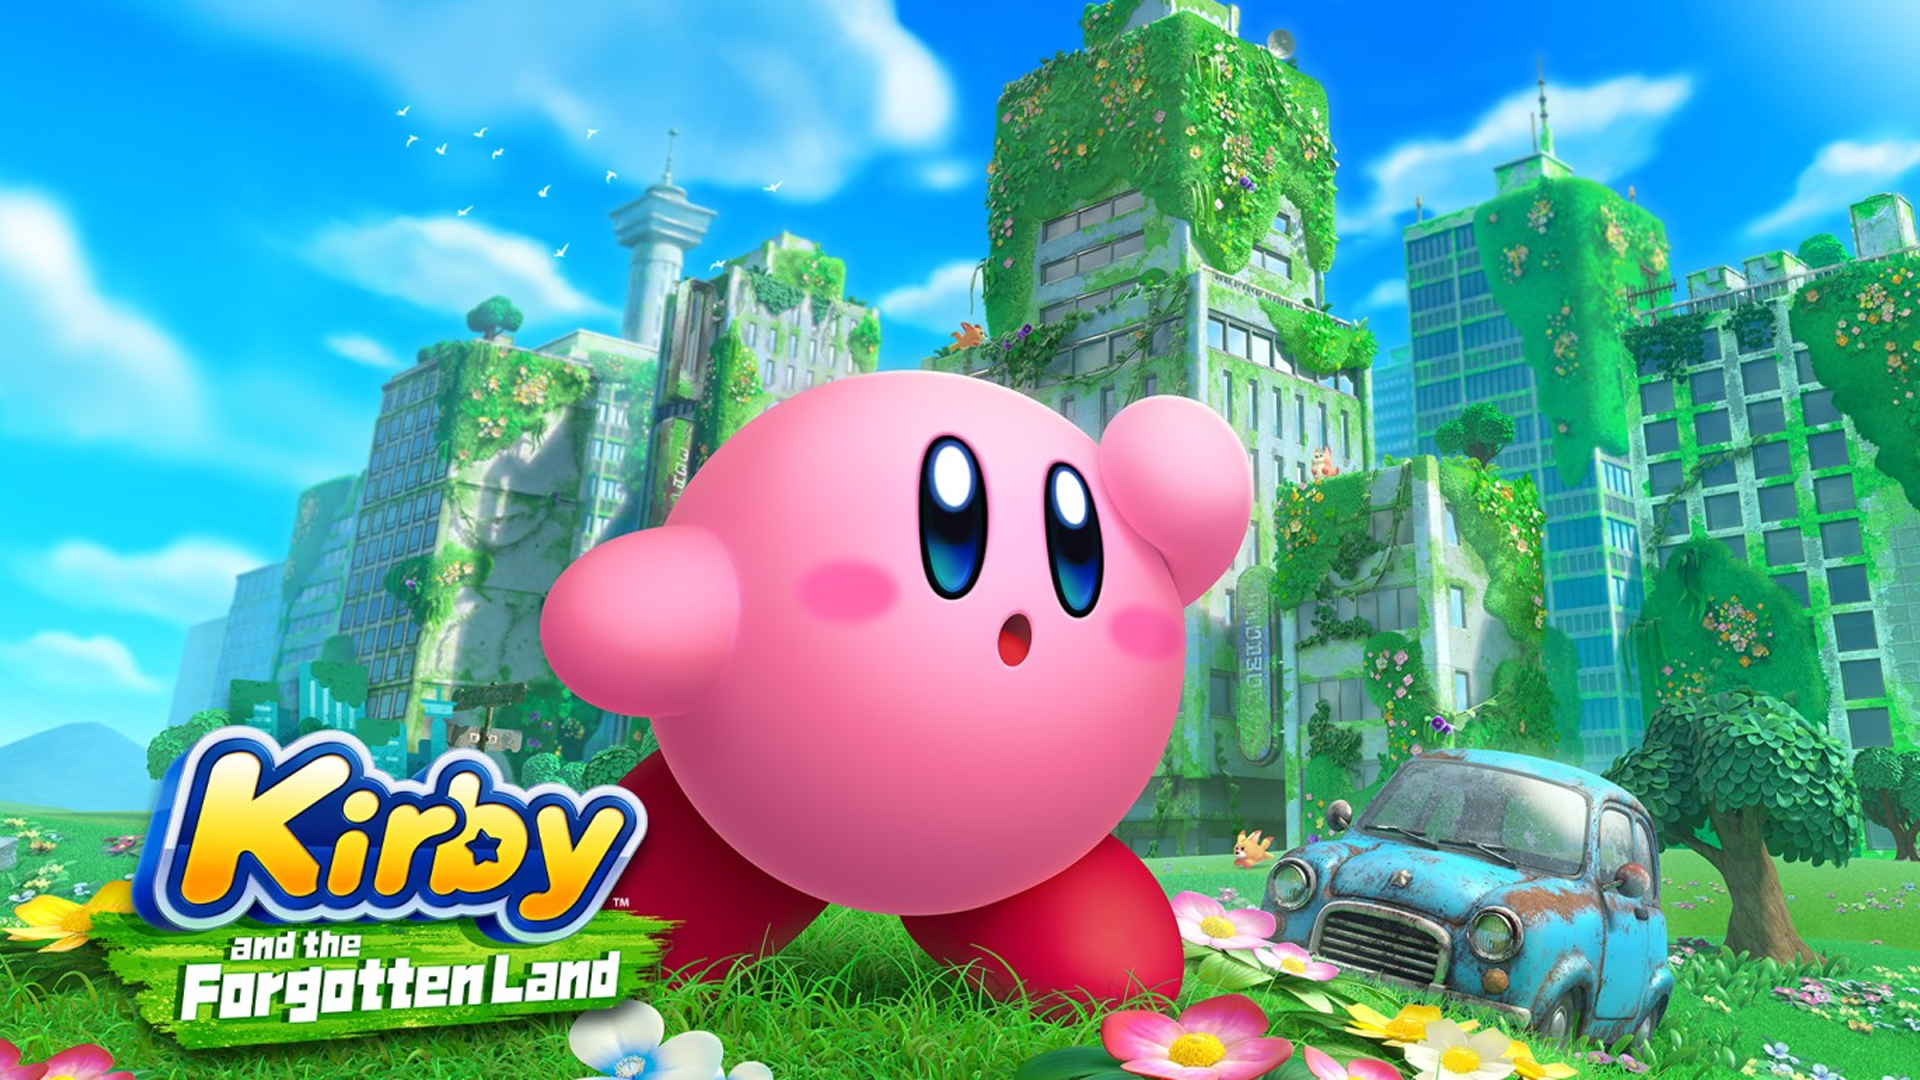 Image for Games of 2022: Kirby and the Forgotten Land had the best road trip montage